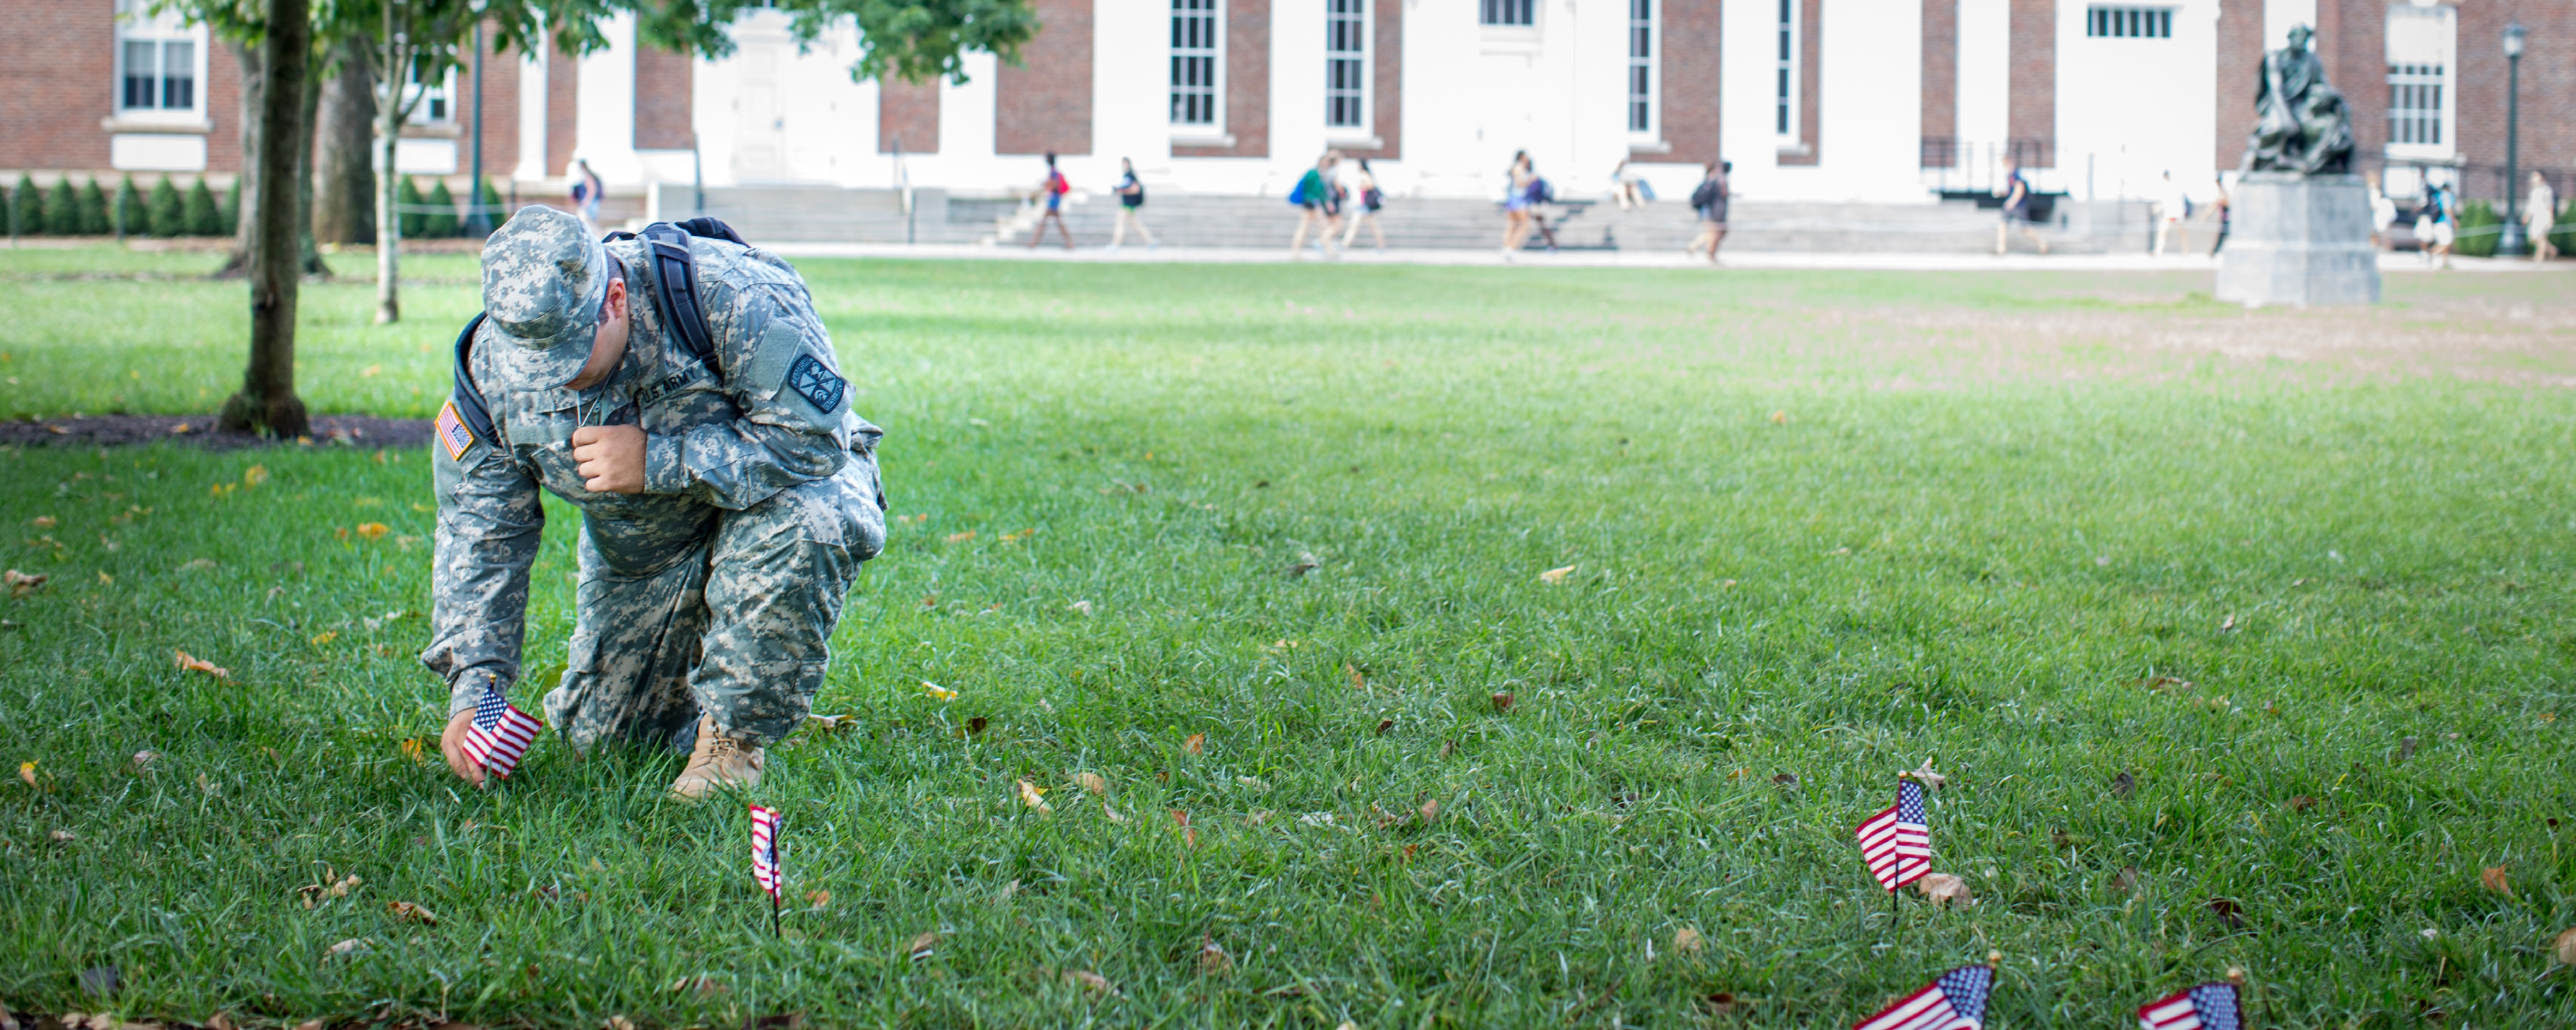 ROTC cadet kneeling on the lawn filled with American Flags